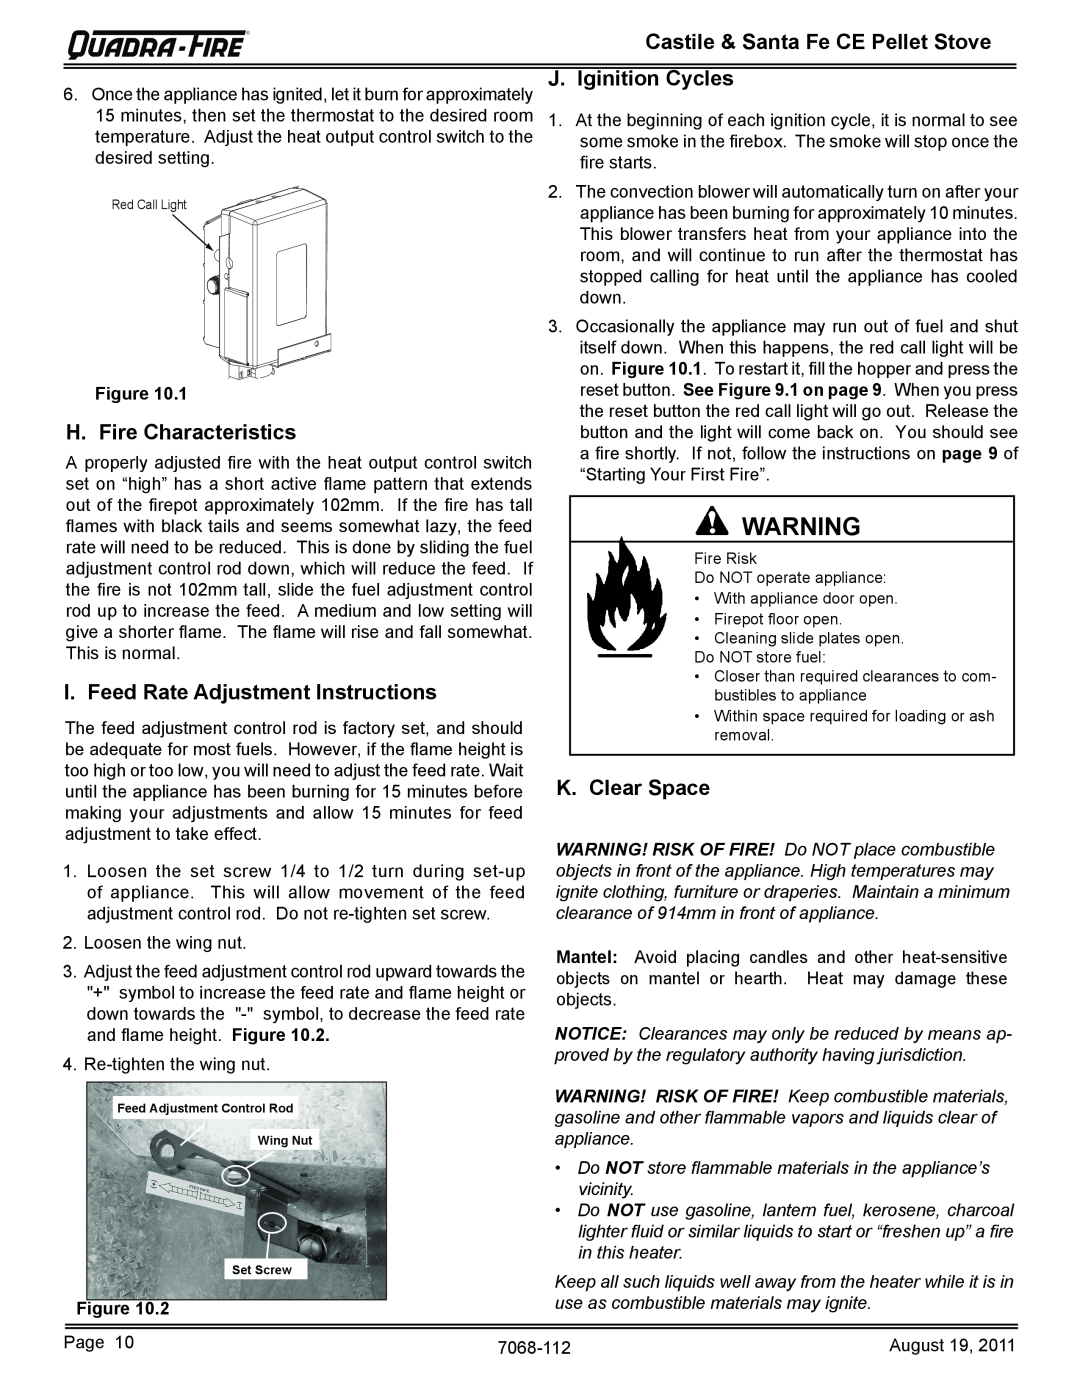 Quadra-Fire 7068-112 J. Iginition Cycles, H. Fire Characteristics, I. Feed Rate Adjustment Instructions, K. Clear Space 